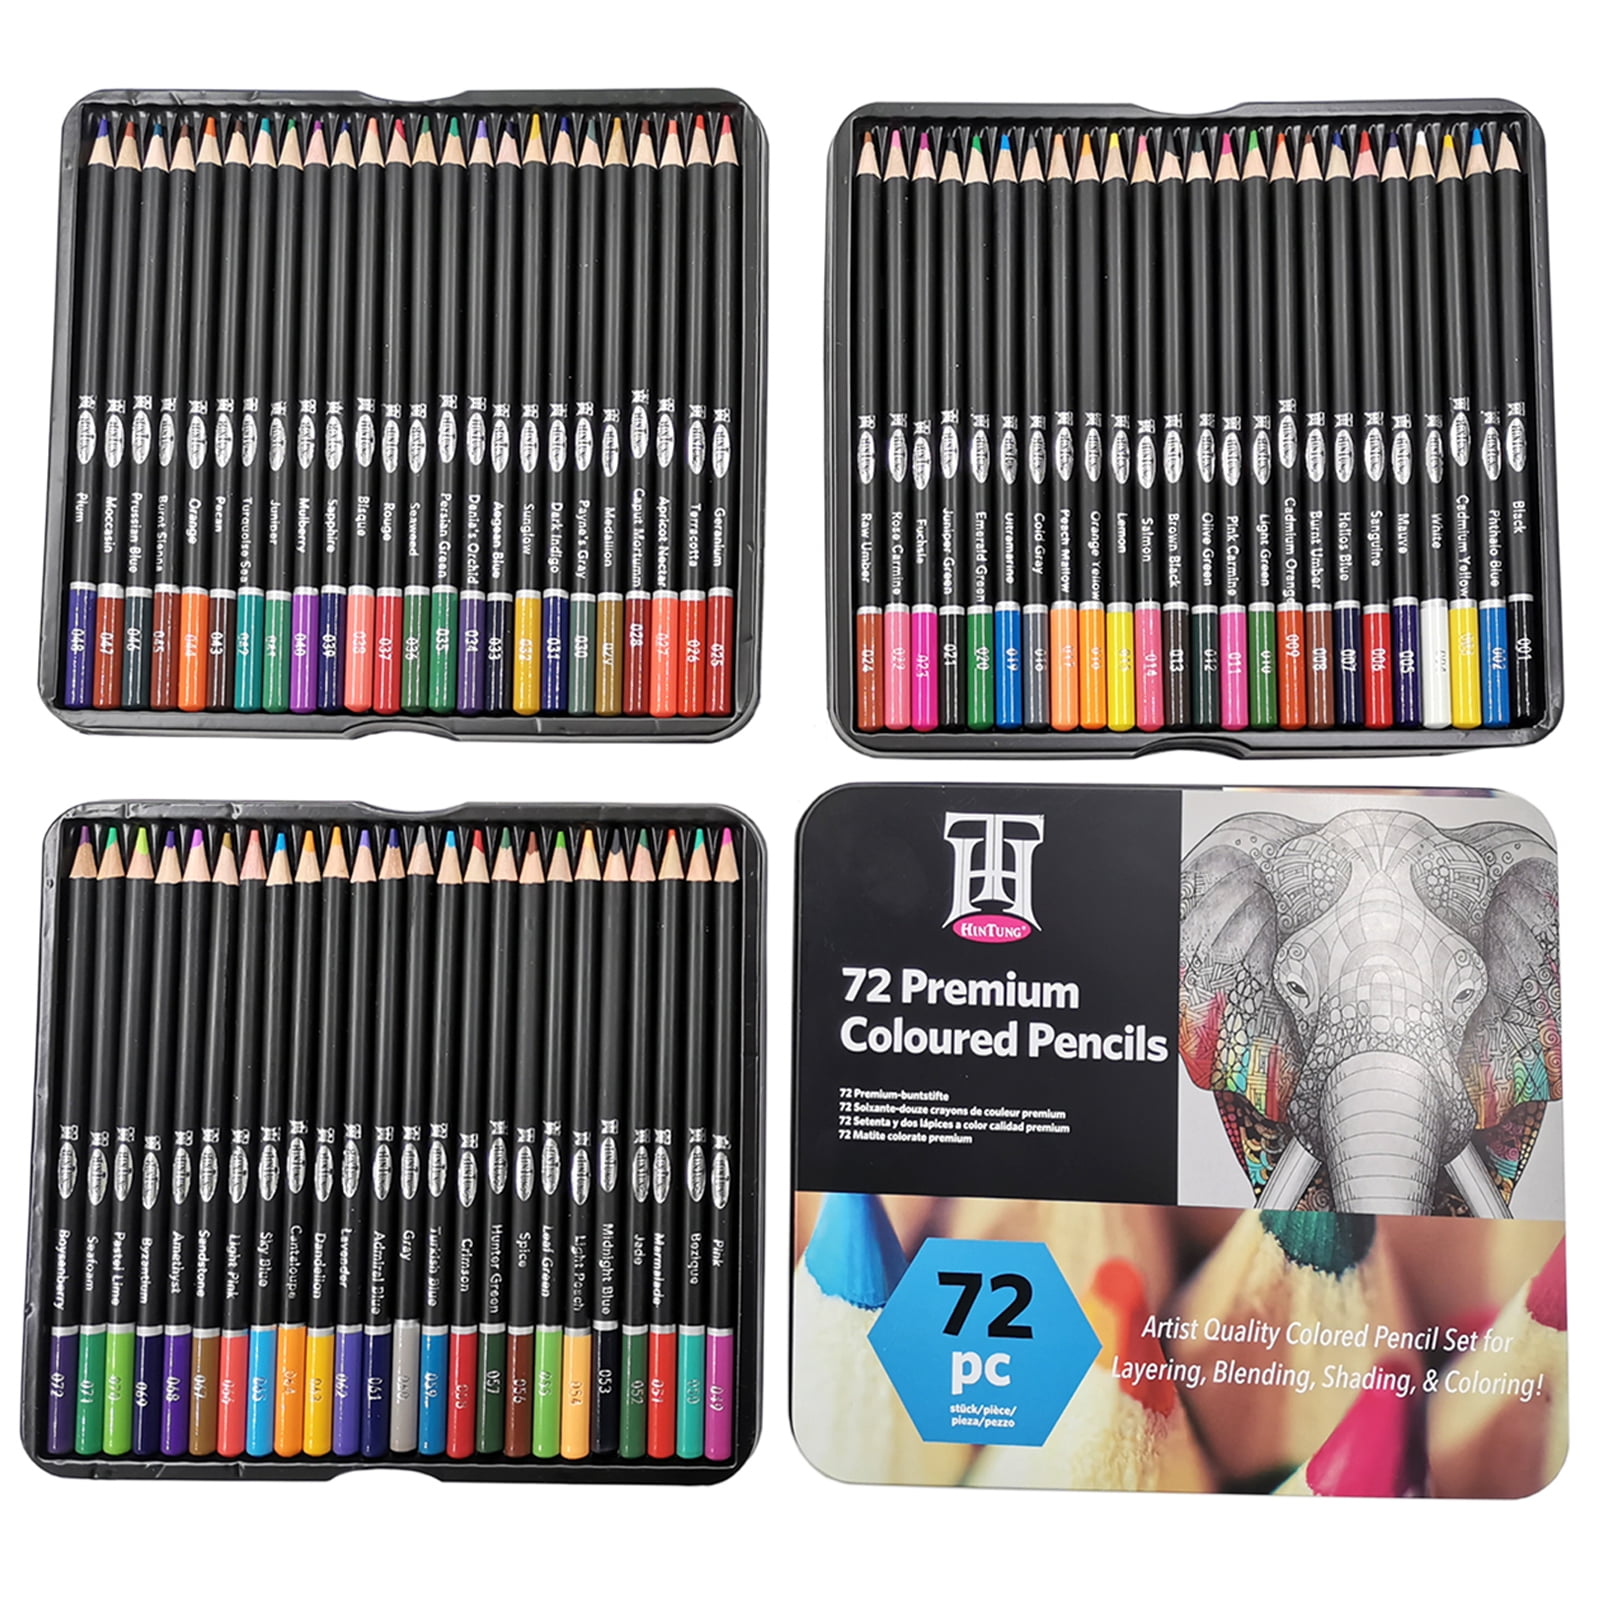  Heshengping 72 Color Pencils Tin Box Coloring Books Soft Core  Pro Artist Drawing Sketching Blending Shading Pencil kit Gift for Adults  Beginners (Colored Pencils kit Blue Tin box) : Arts